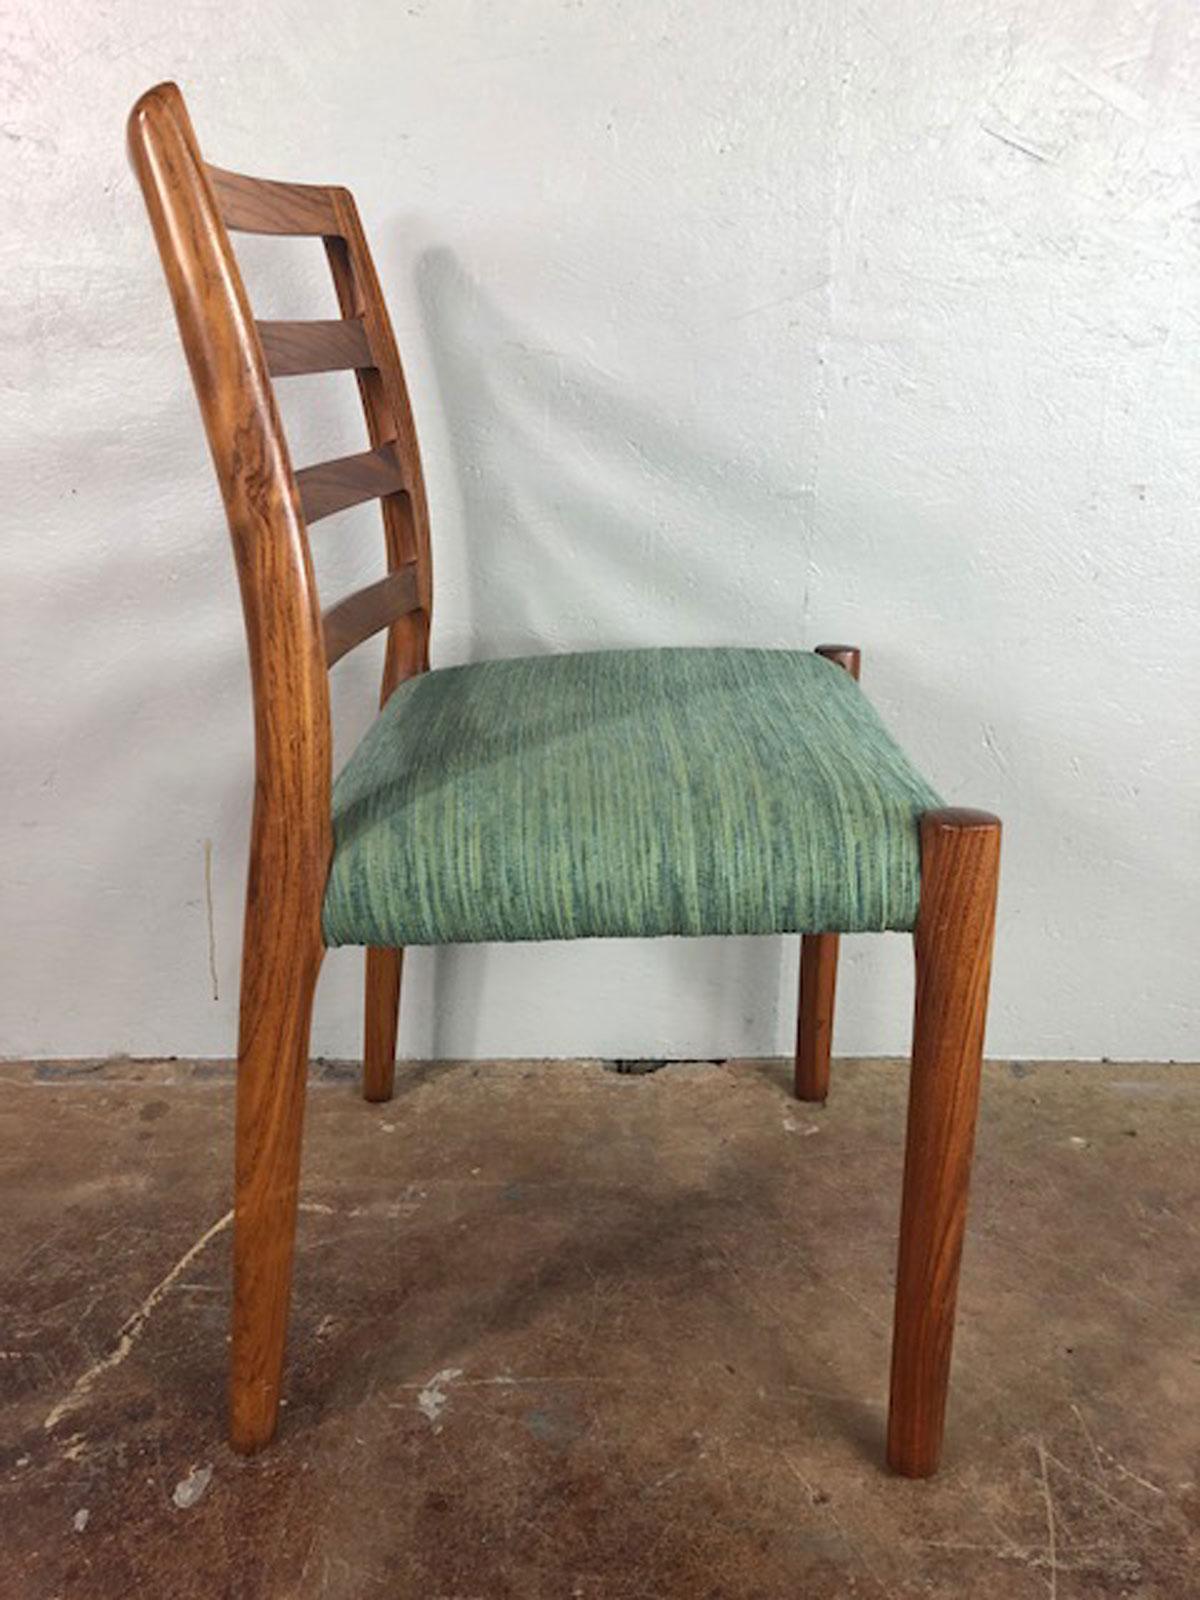 Rosewood Danish dining chair attributed to J.L. Moller. Reupholstered, circa 1960s. Very good condition. Structurally very solid.